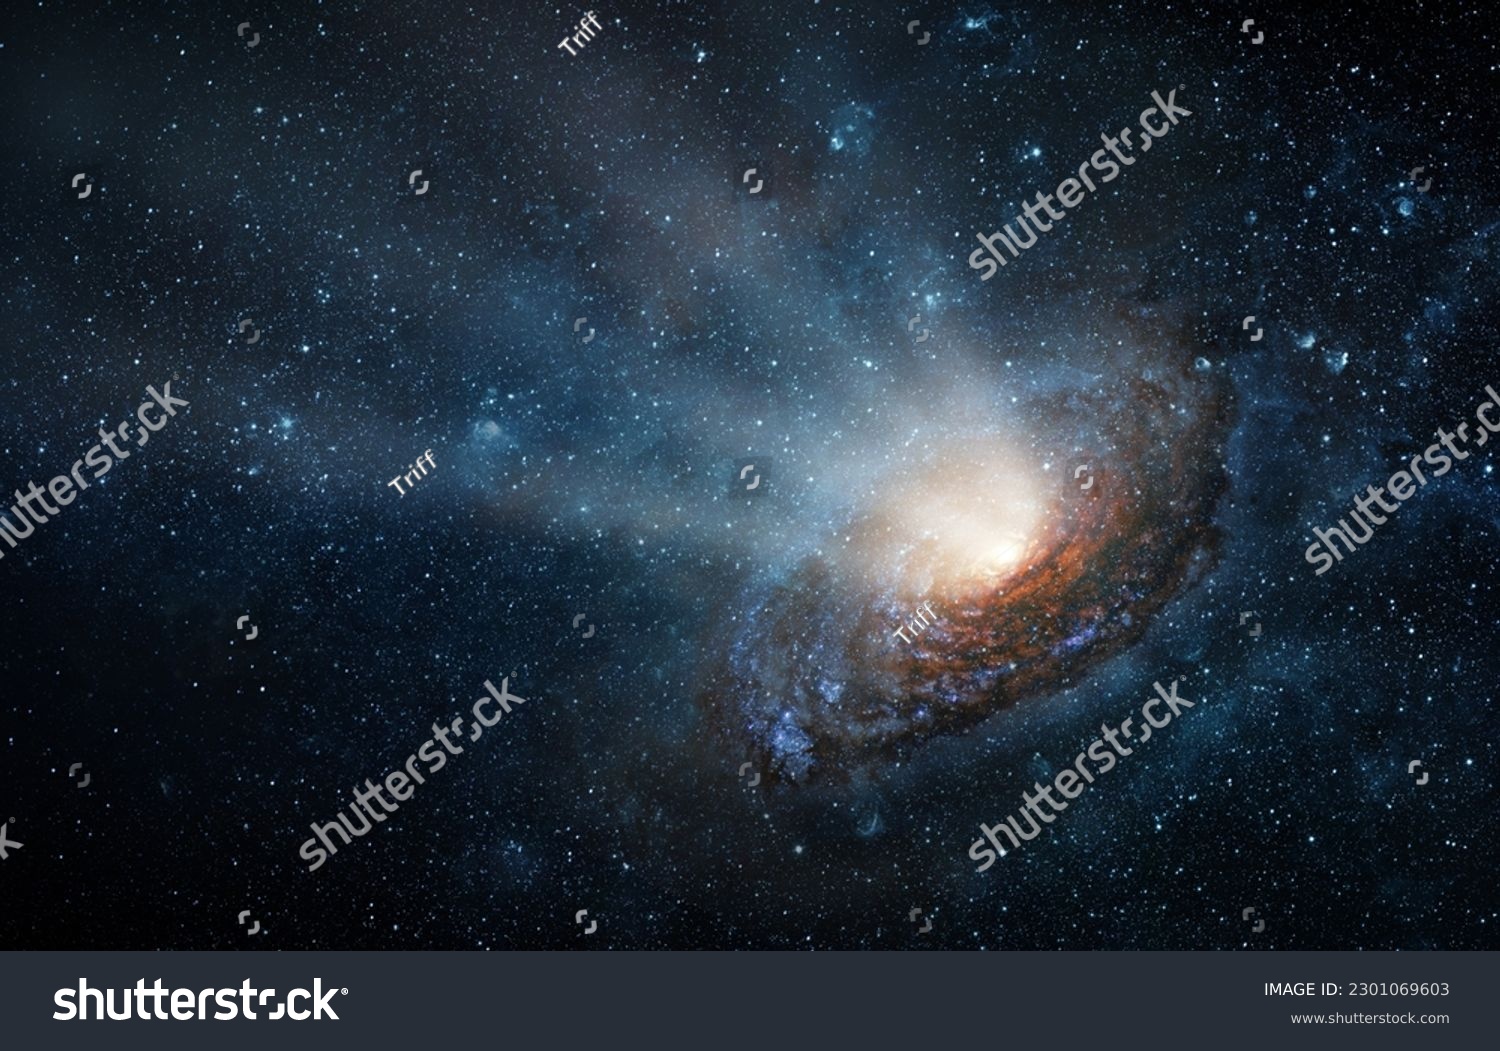 Radiation from a black hole at the center of a galaxy. Space scene with stars, black hole in galaxy. Panorama. Universe filled with stars, nebula and galaxy,. Elements of this image furnished by NASA #2301069603